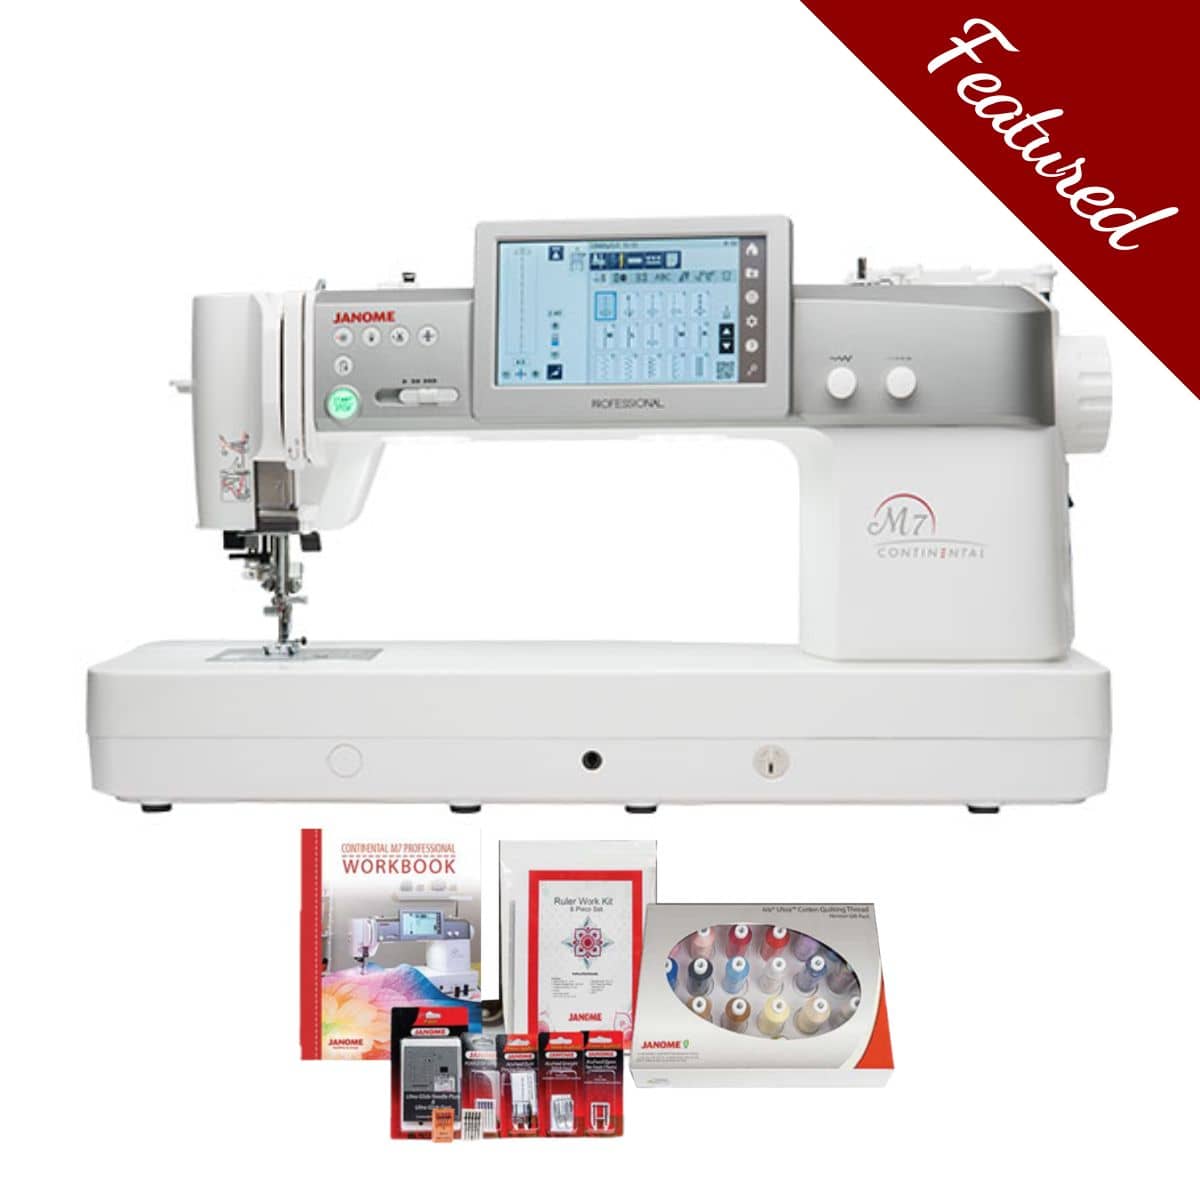 Janome Sewing Machines - Moore's Sewing